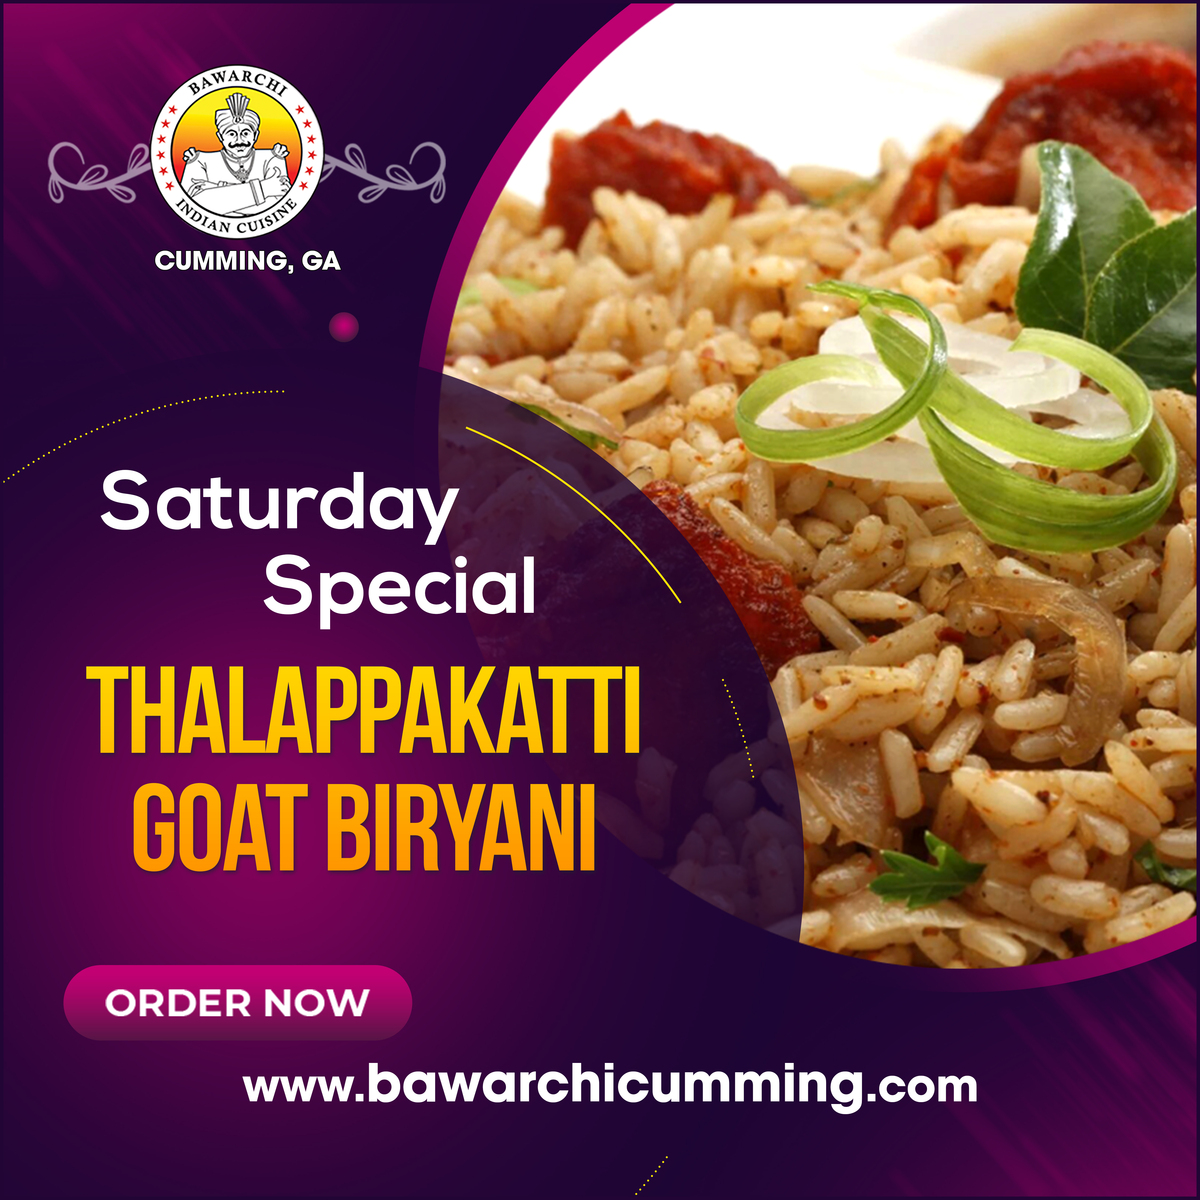 Now you have one more reason to visit us at the weekend🤗😋

Order Online📲: bit.ly/bawarchicumming

#BawarchiCumming #food #bawarchi #bawarchibiryani #biryaniexpert #BawarchiBiryaniCumming #NatukodiBiryani #NatukodiFryBiryani #NatukodiFryBiryani #countrychicken #chicken